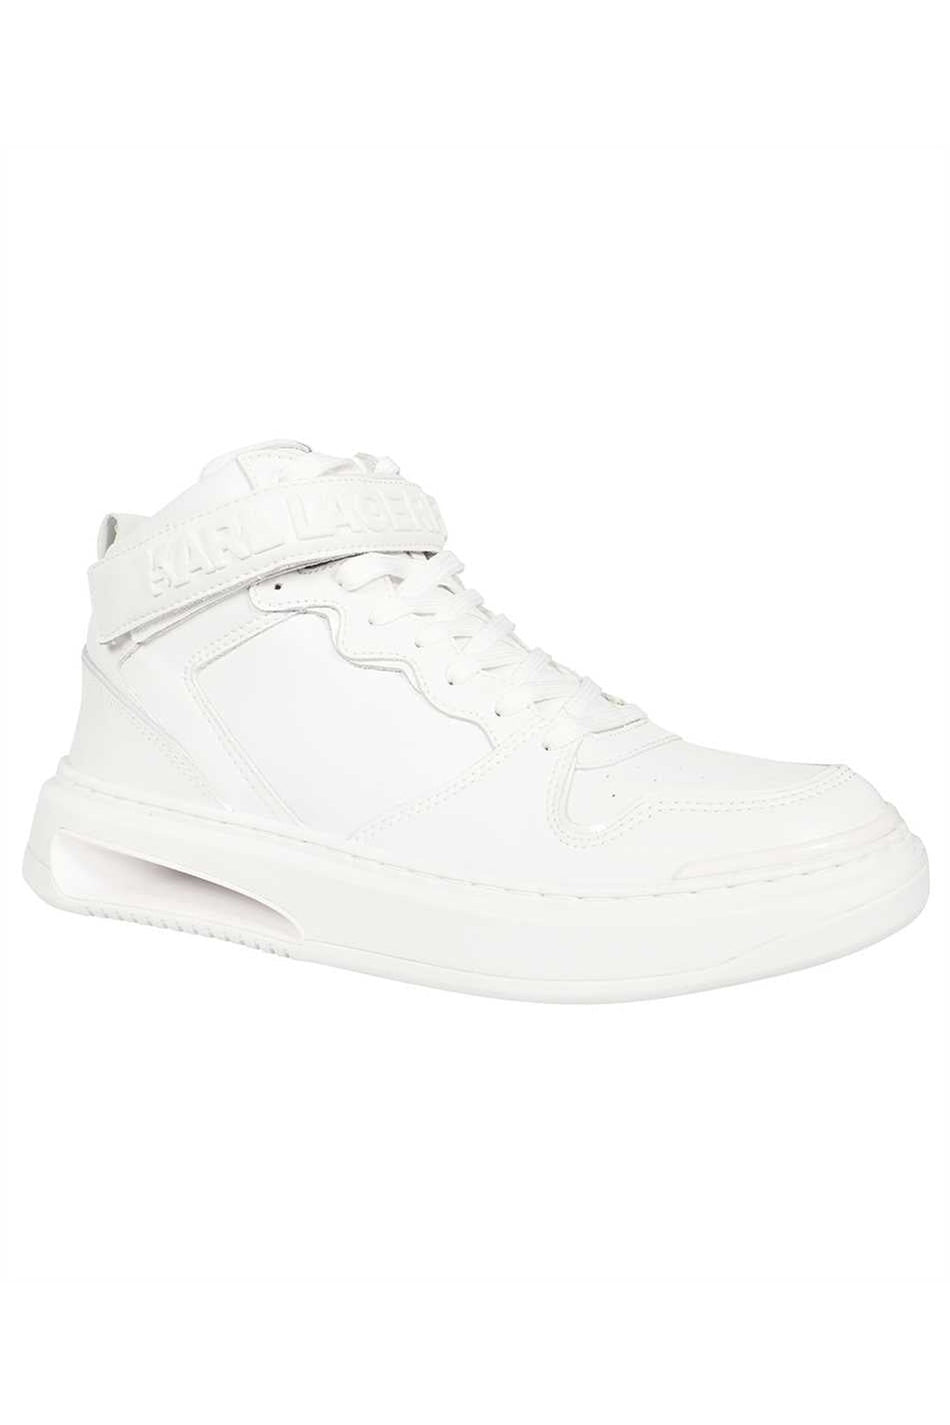 Logo detail leather sneakers-Karl Lagerfeld-OUTLET-SALE-ARCHIVIST